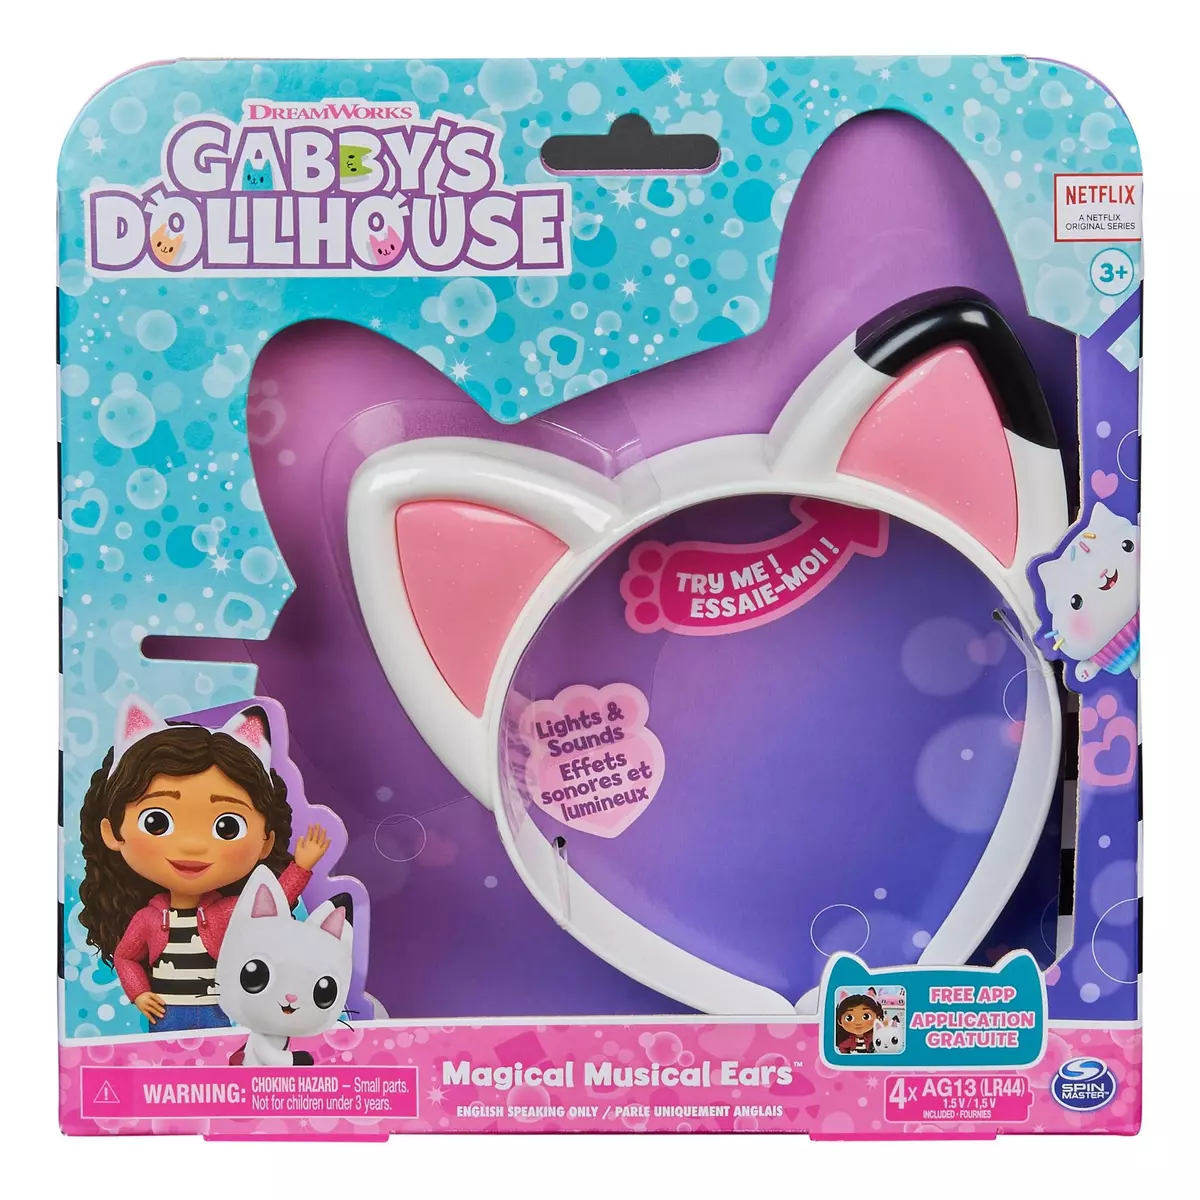 SPIN MASTER Oreilles musicales Gabby's Dollhouse